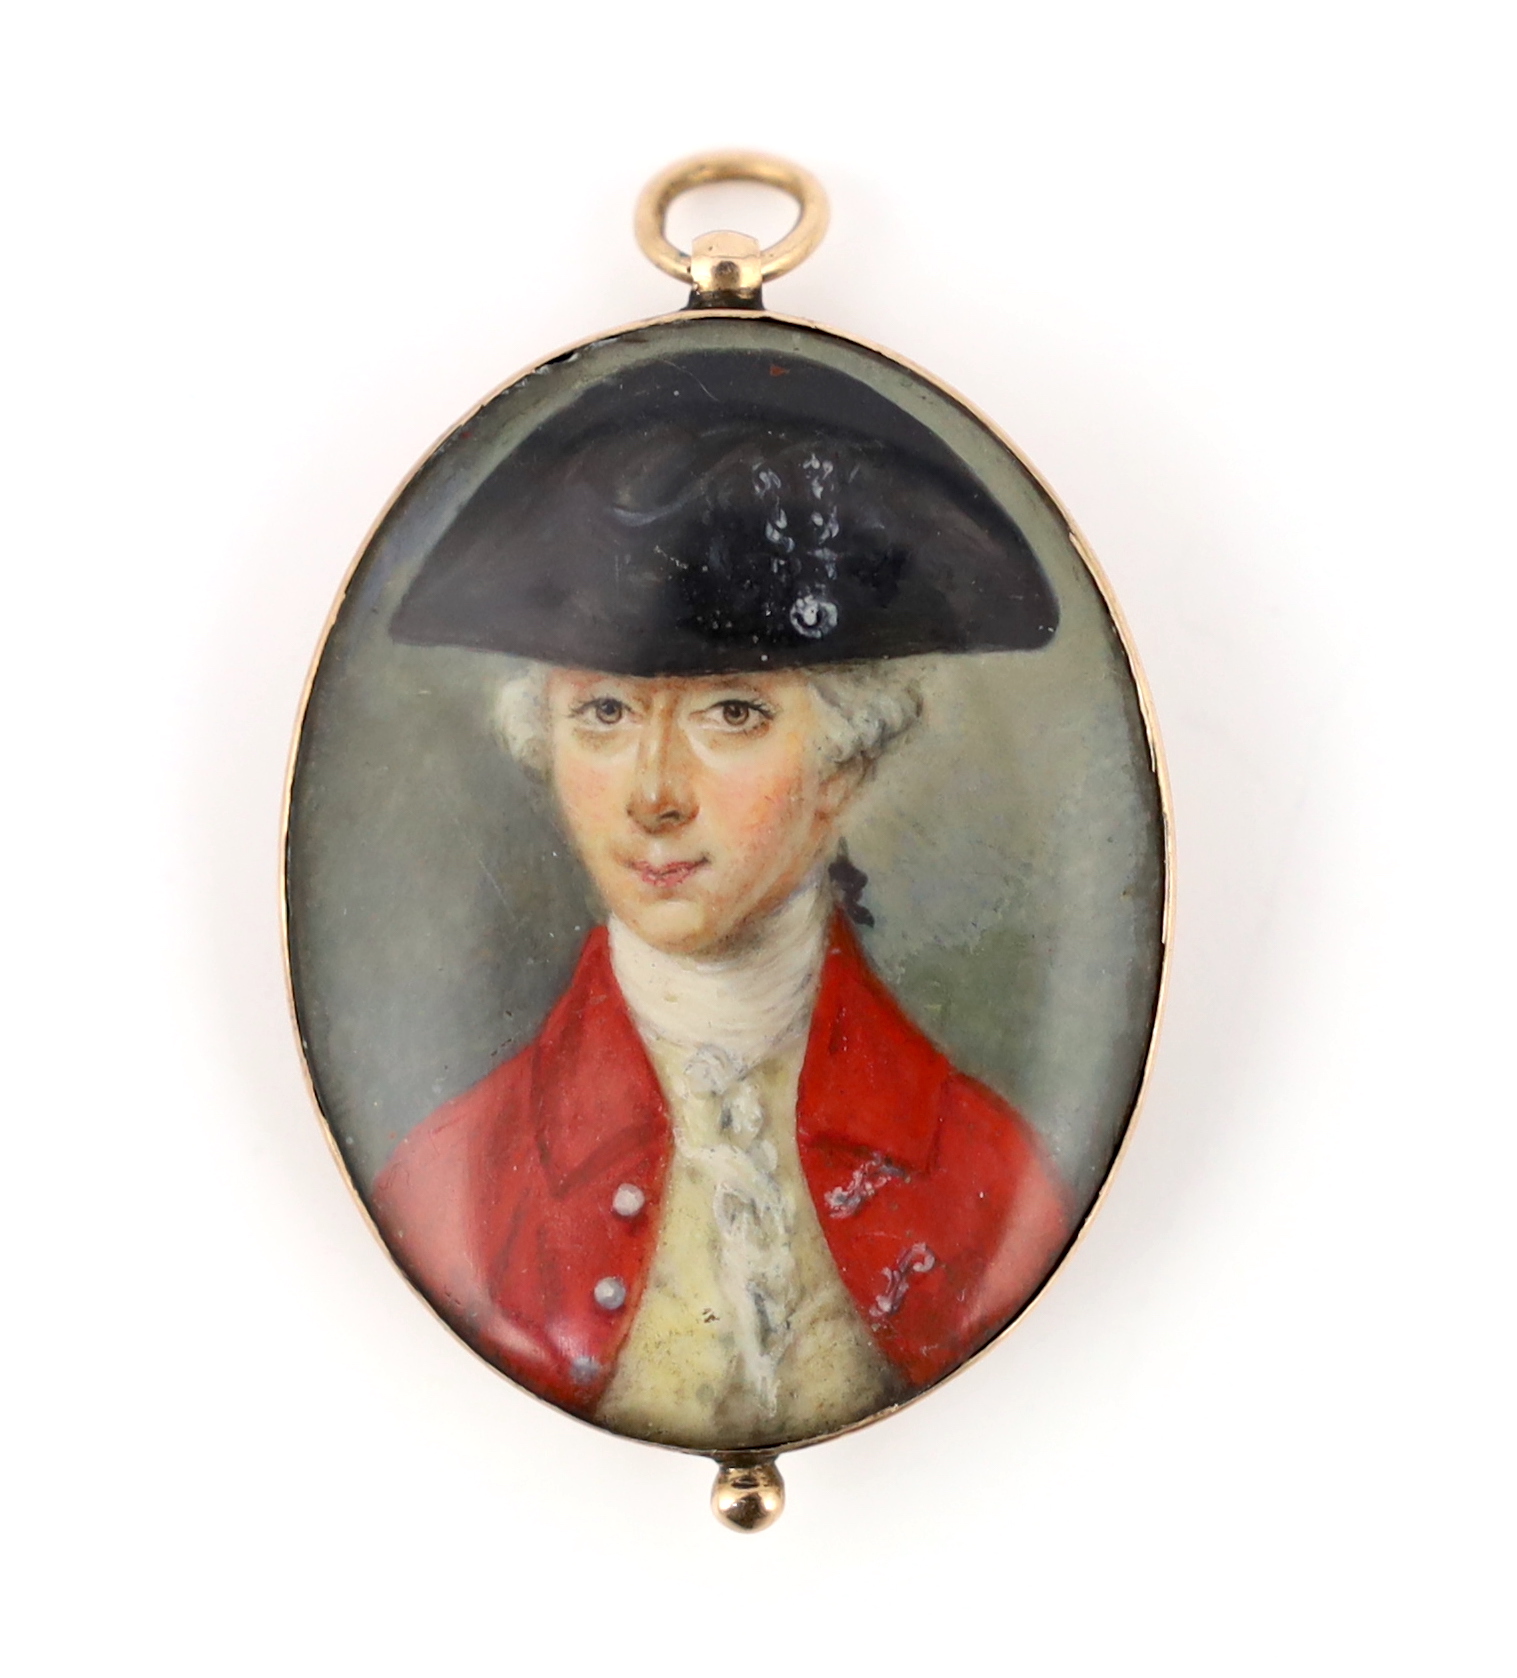 Jeremiah Meyer, R.A. (Anglo-German, 1735-1789), Portrait miniature of a gentleman, watercolour on ivory, 3.4 x 2.6cm. CITES Submission reference EZQ44EEJ